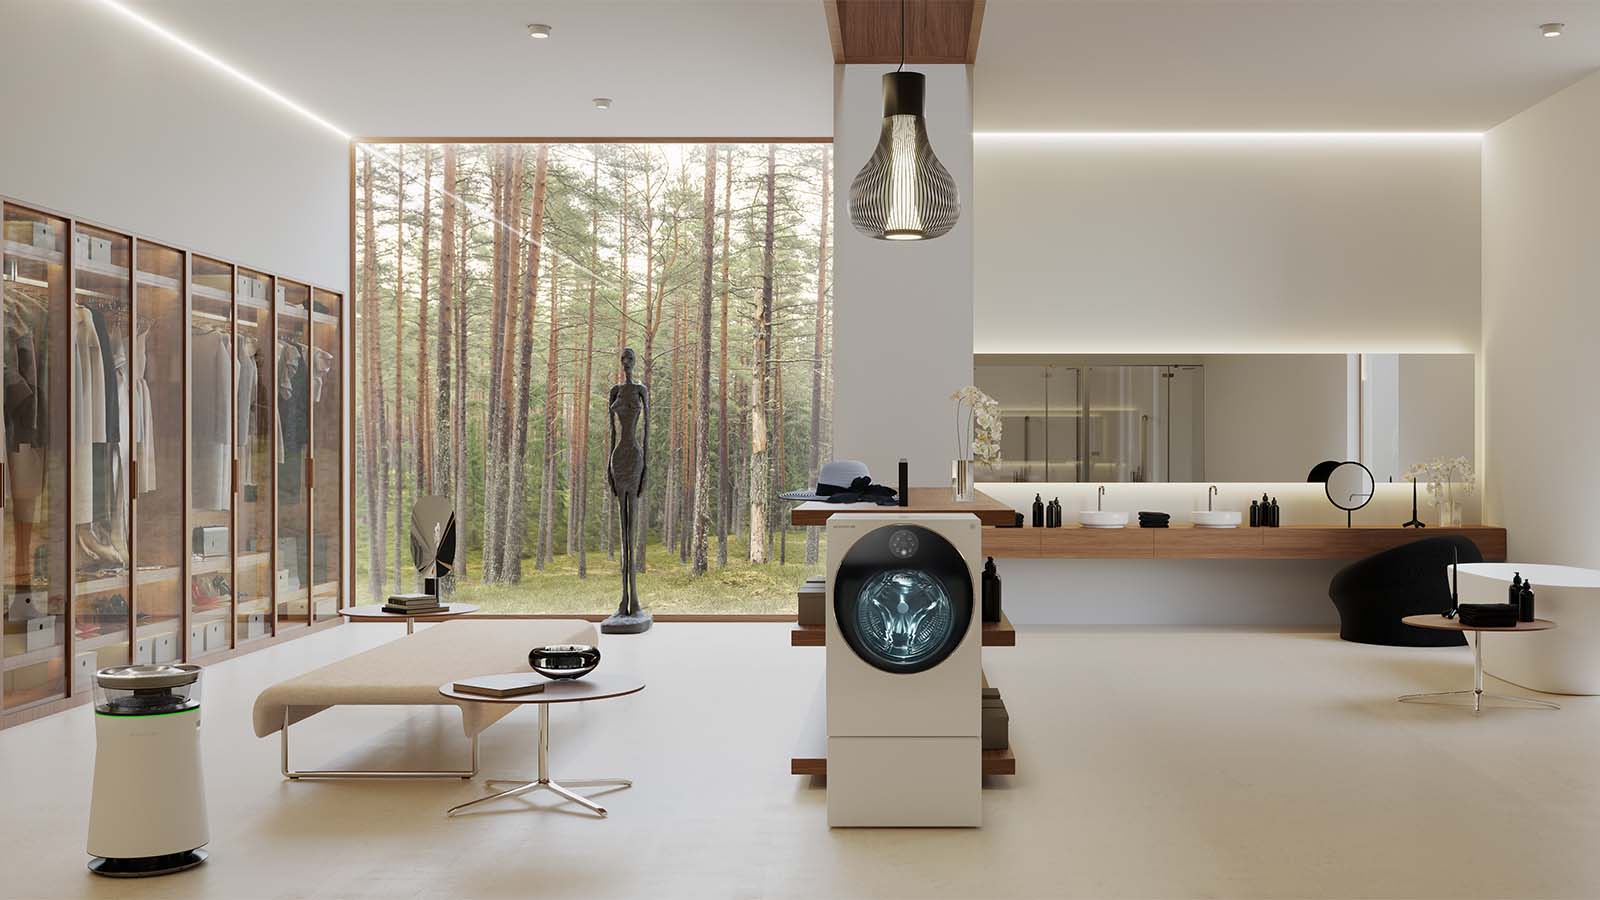 LG Signature washer in a 3D Virtual Space